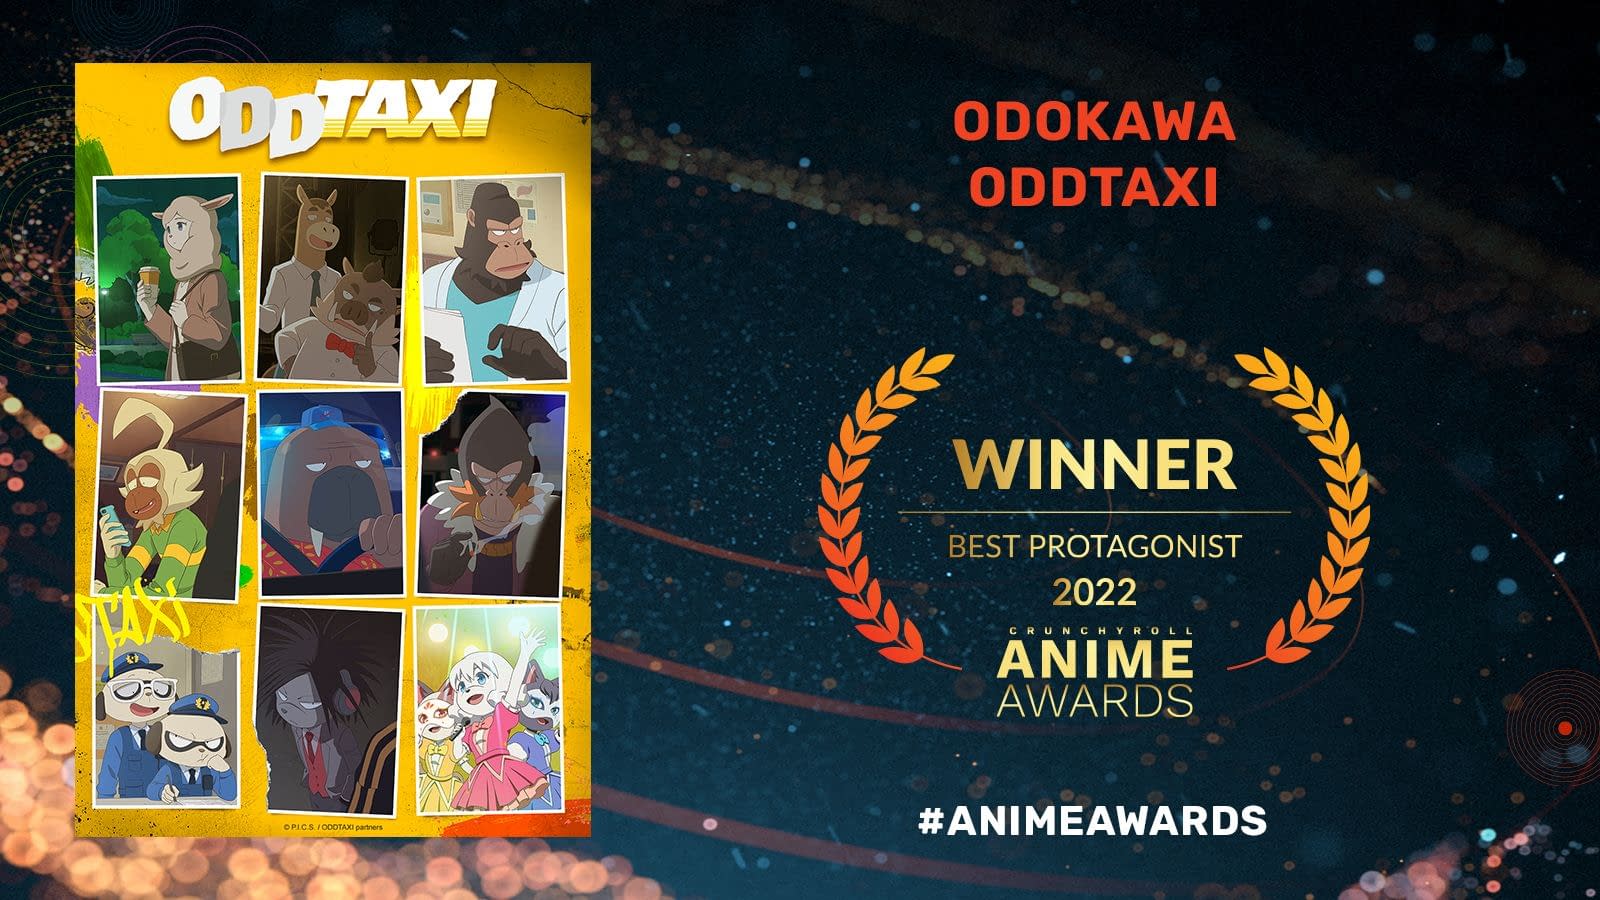 AniTAY's Predictions for the 2023 Crunchyroll Anime Awards, by Stinolez, AniTAY-Official